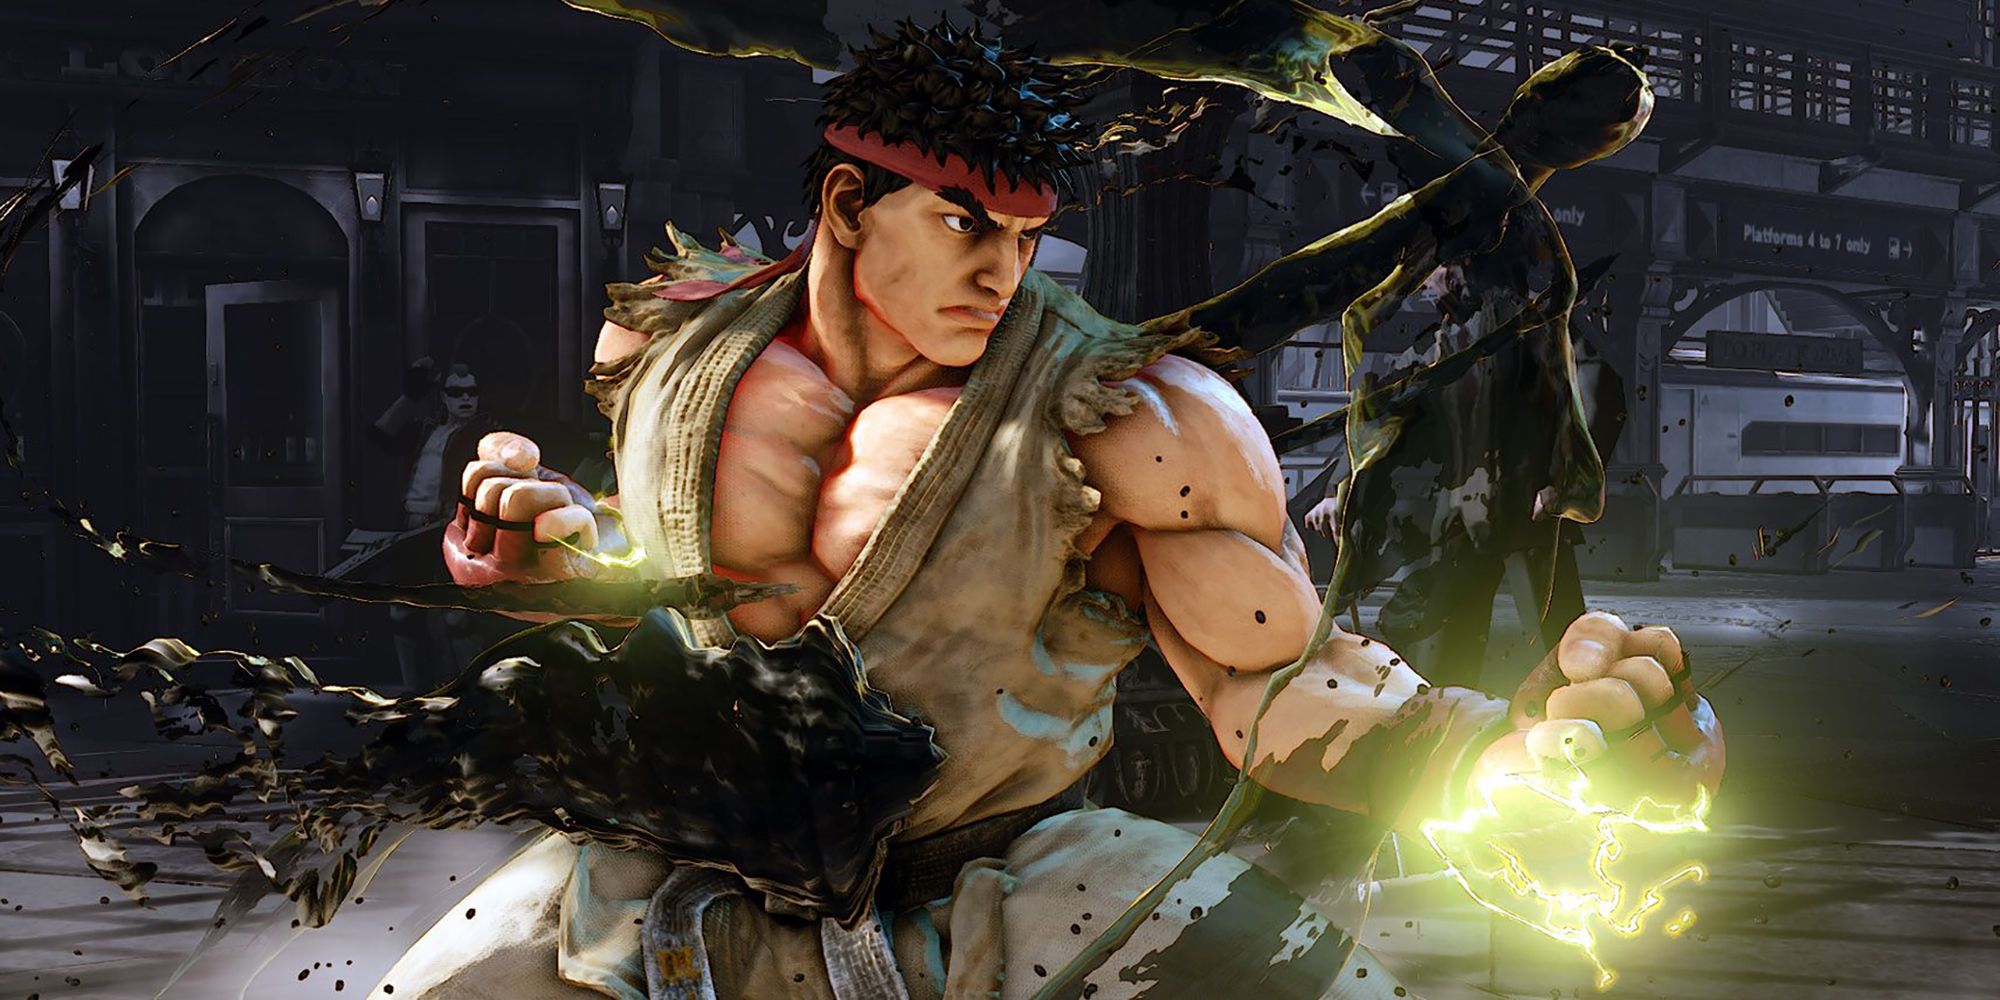 Ryu gets ready to strike in a battle at the Union Station in Street Fighter 5.